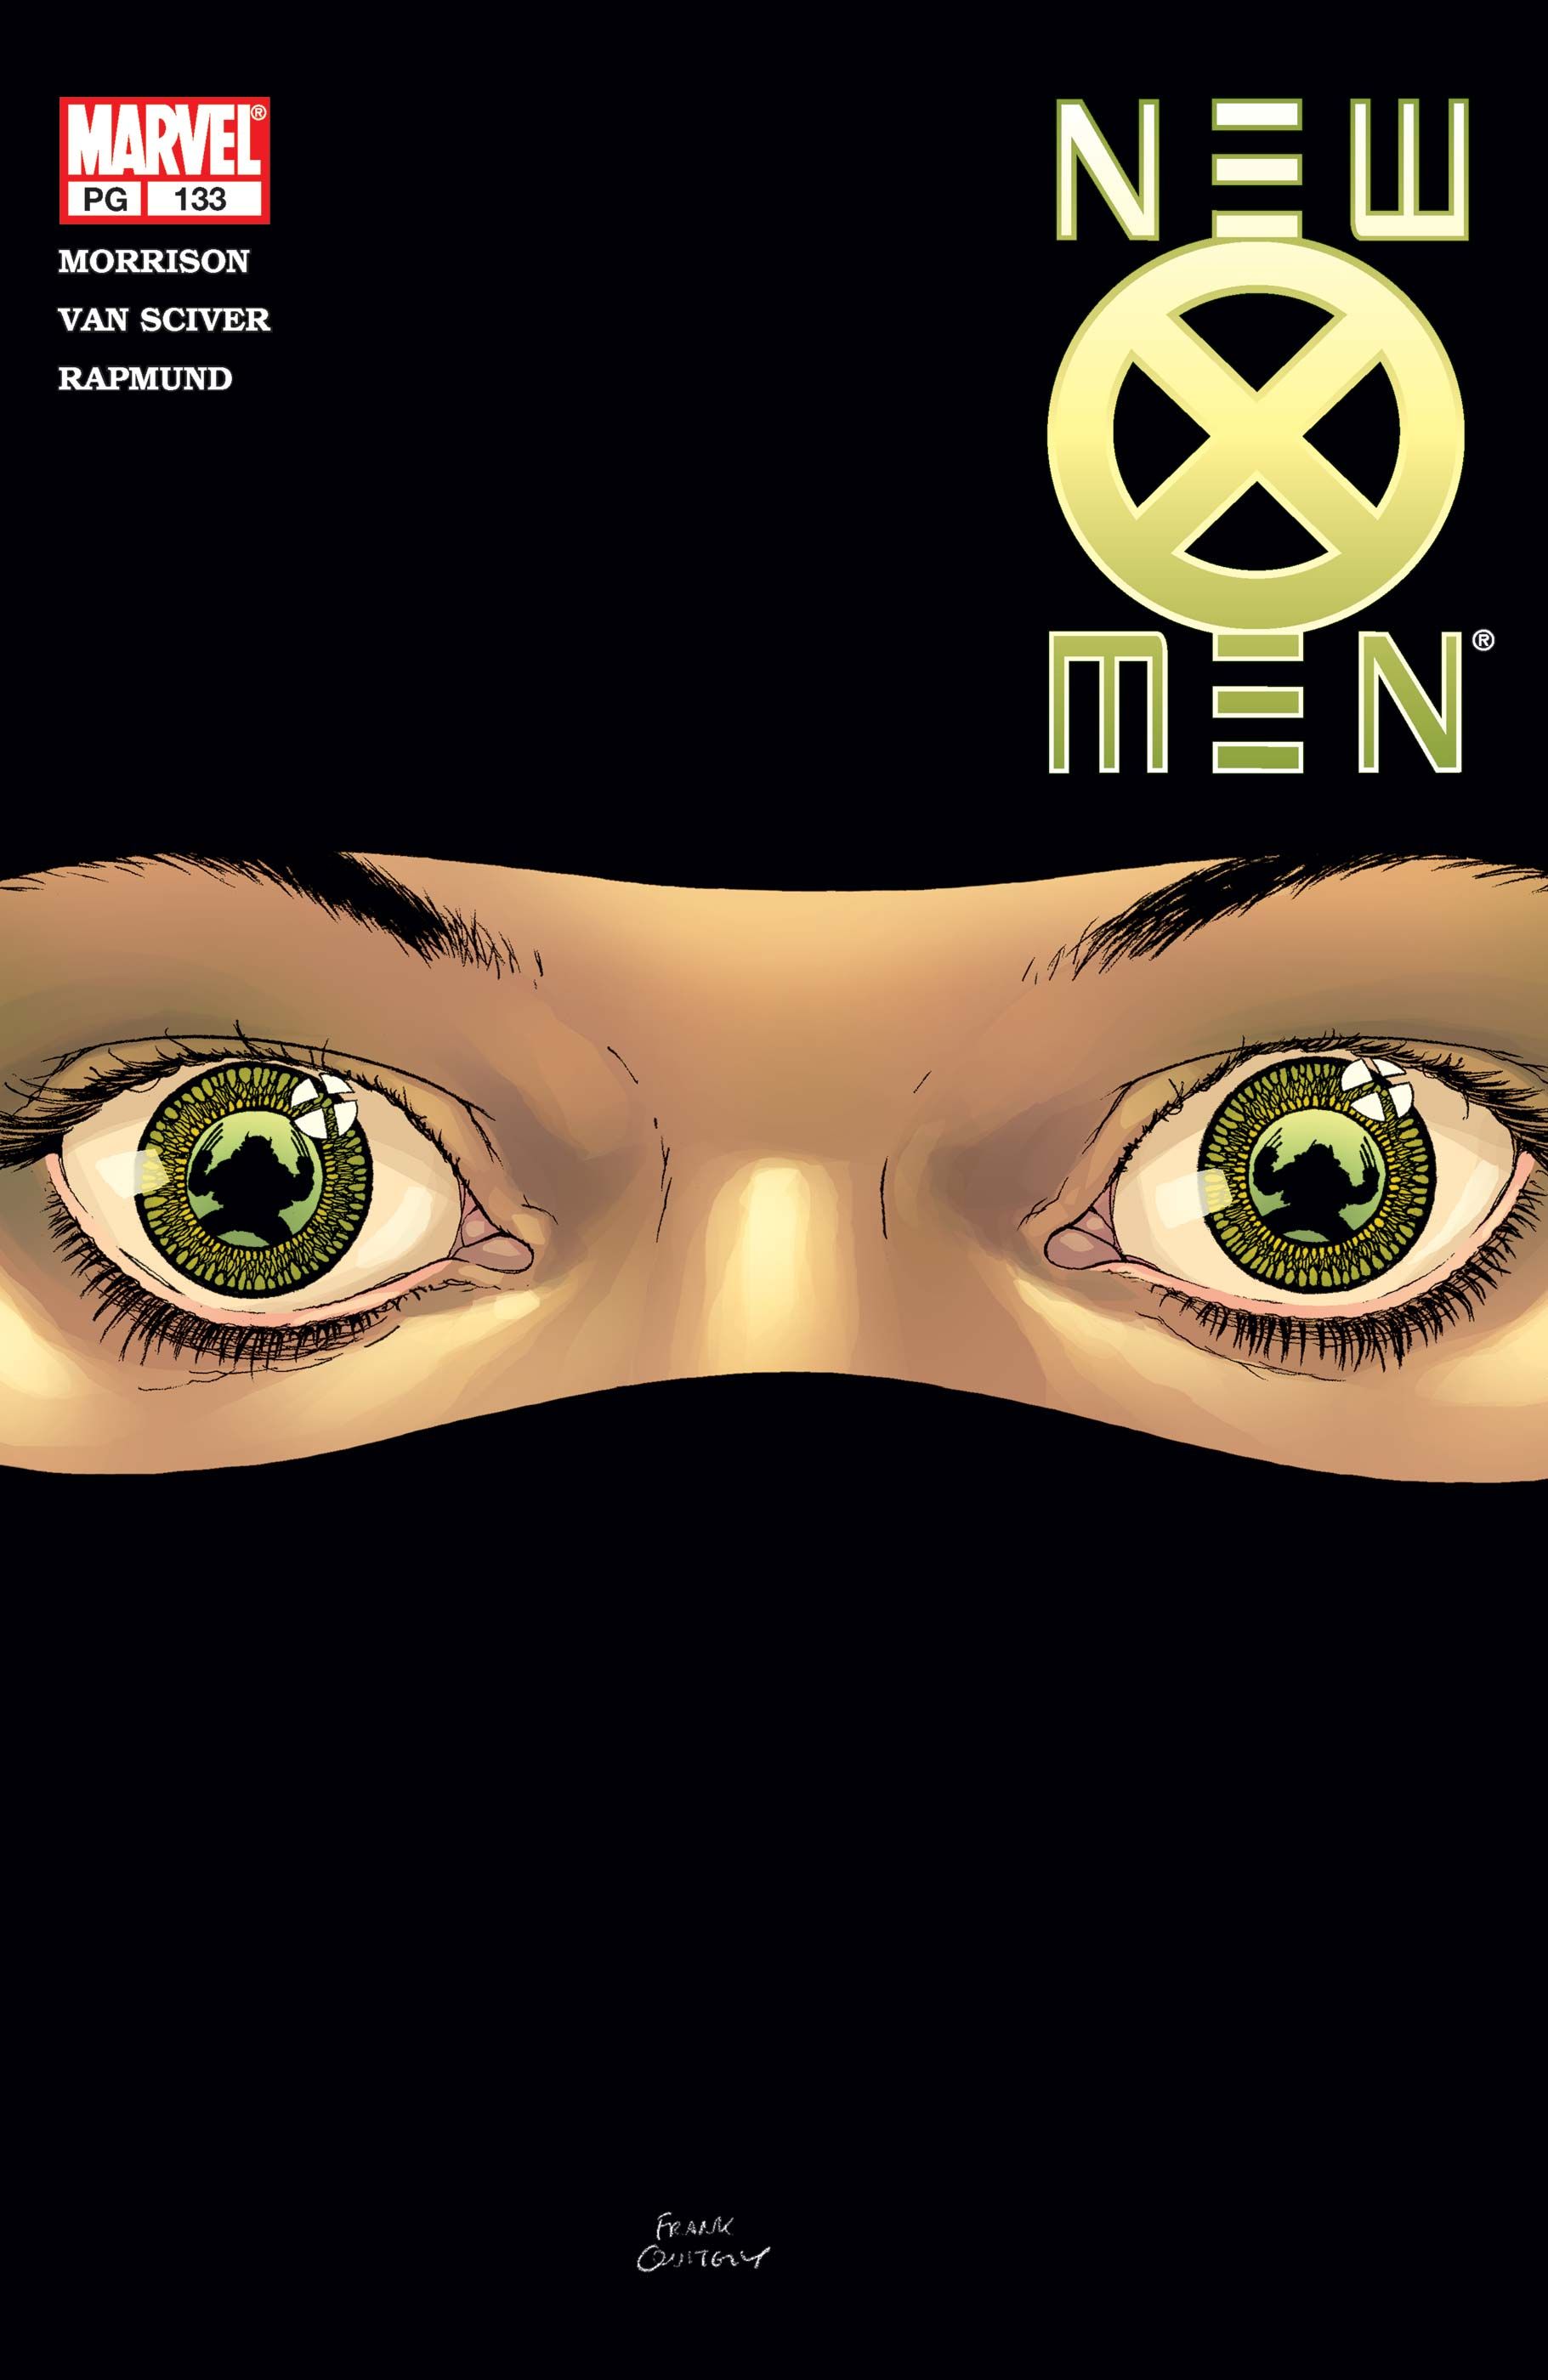 Dust on Frank Quitely's cover to New X-Men #133